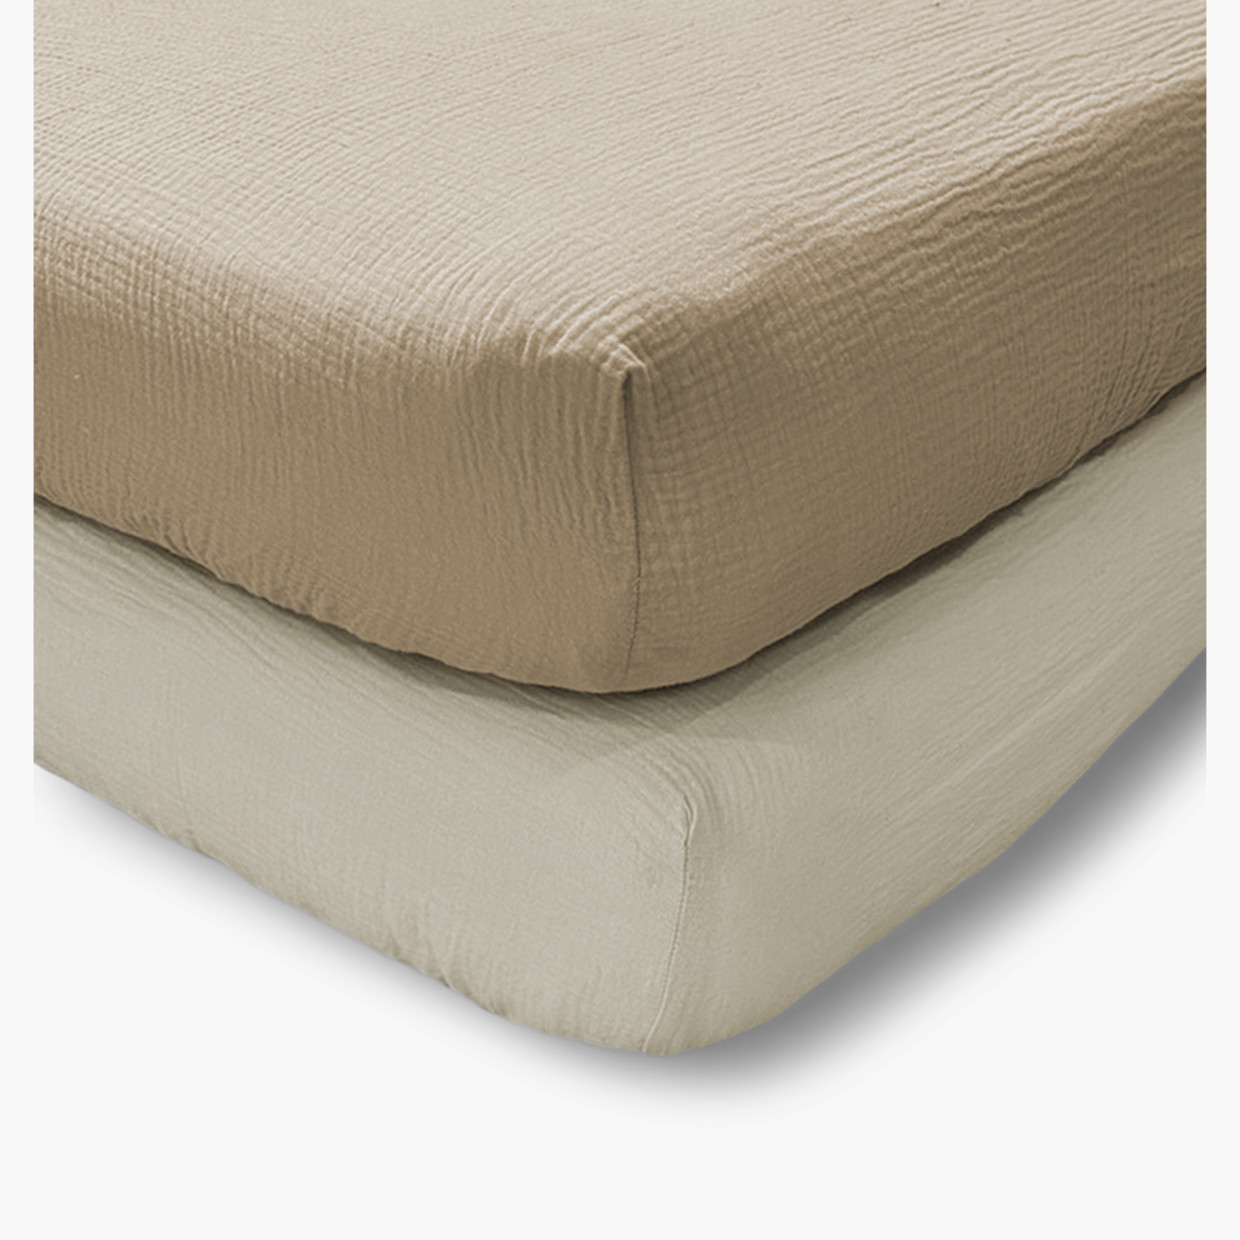 Levtex Baby Cloud Muslin Fitted Sheet Set of 2 - Cocoa/Beige.